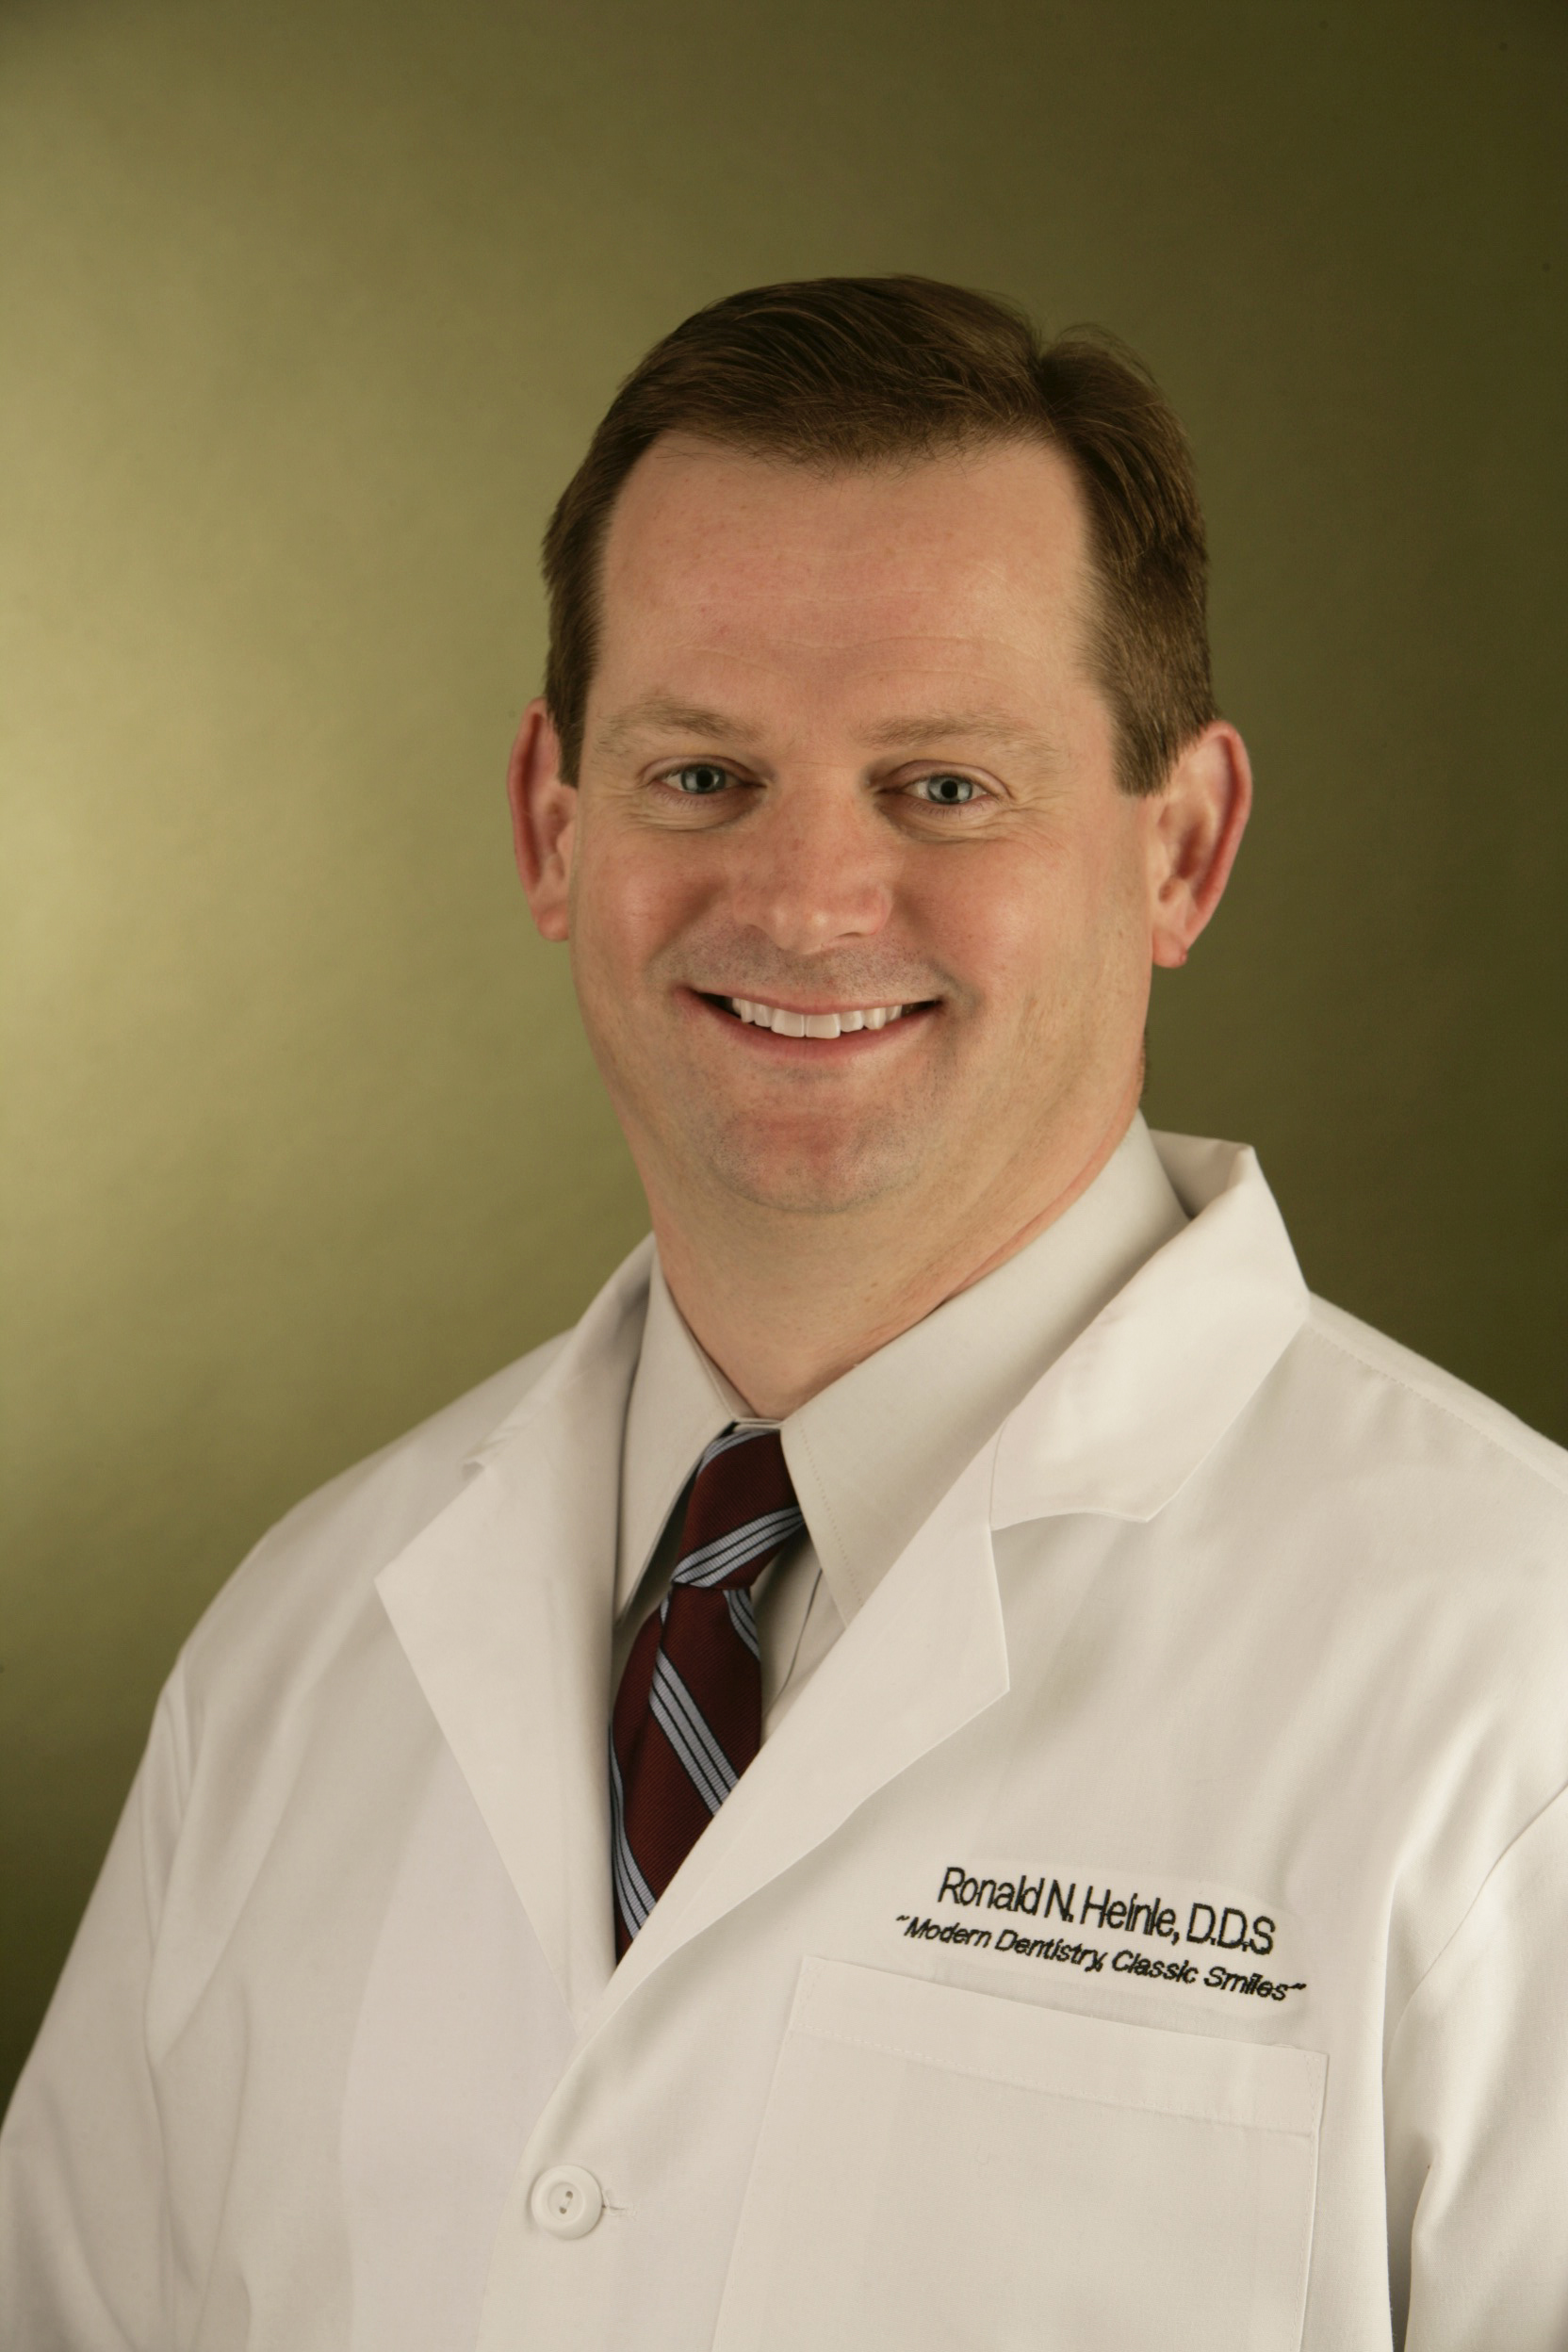 Dr. Ronald Heinle DDS